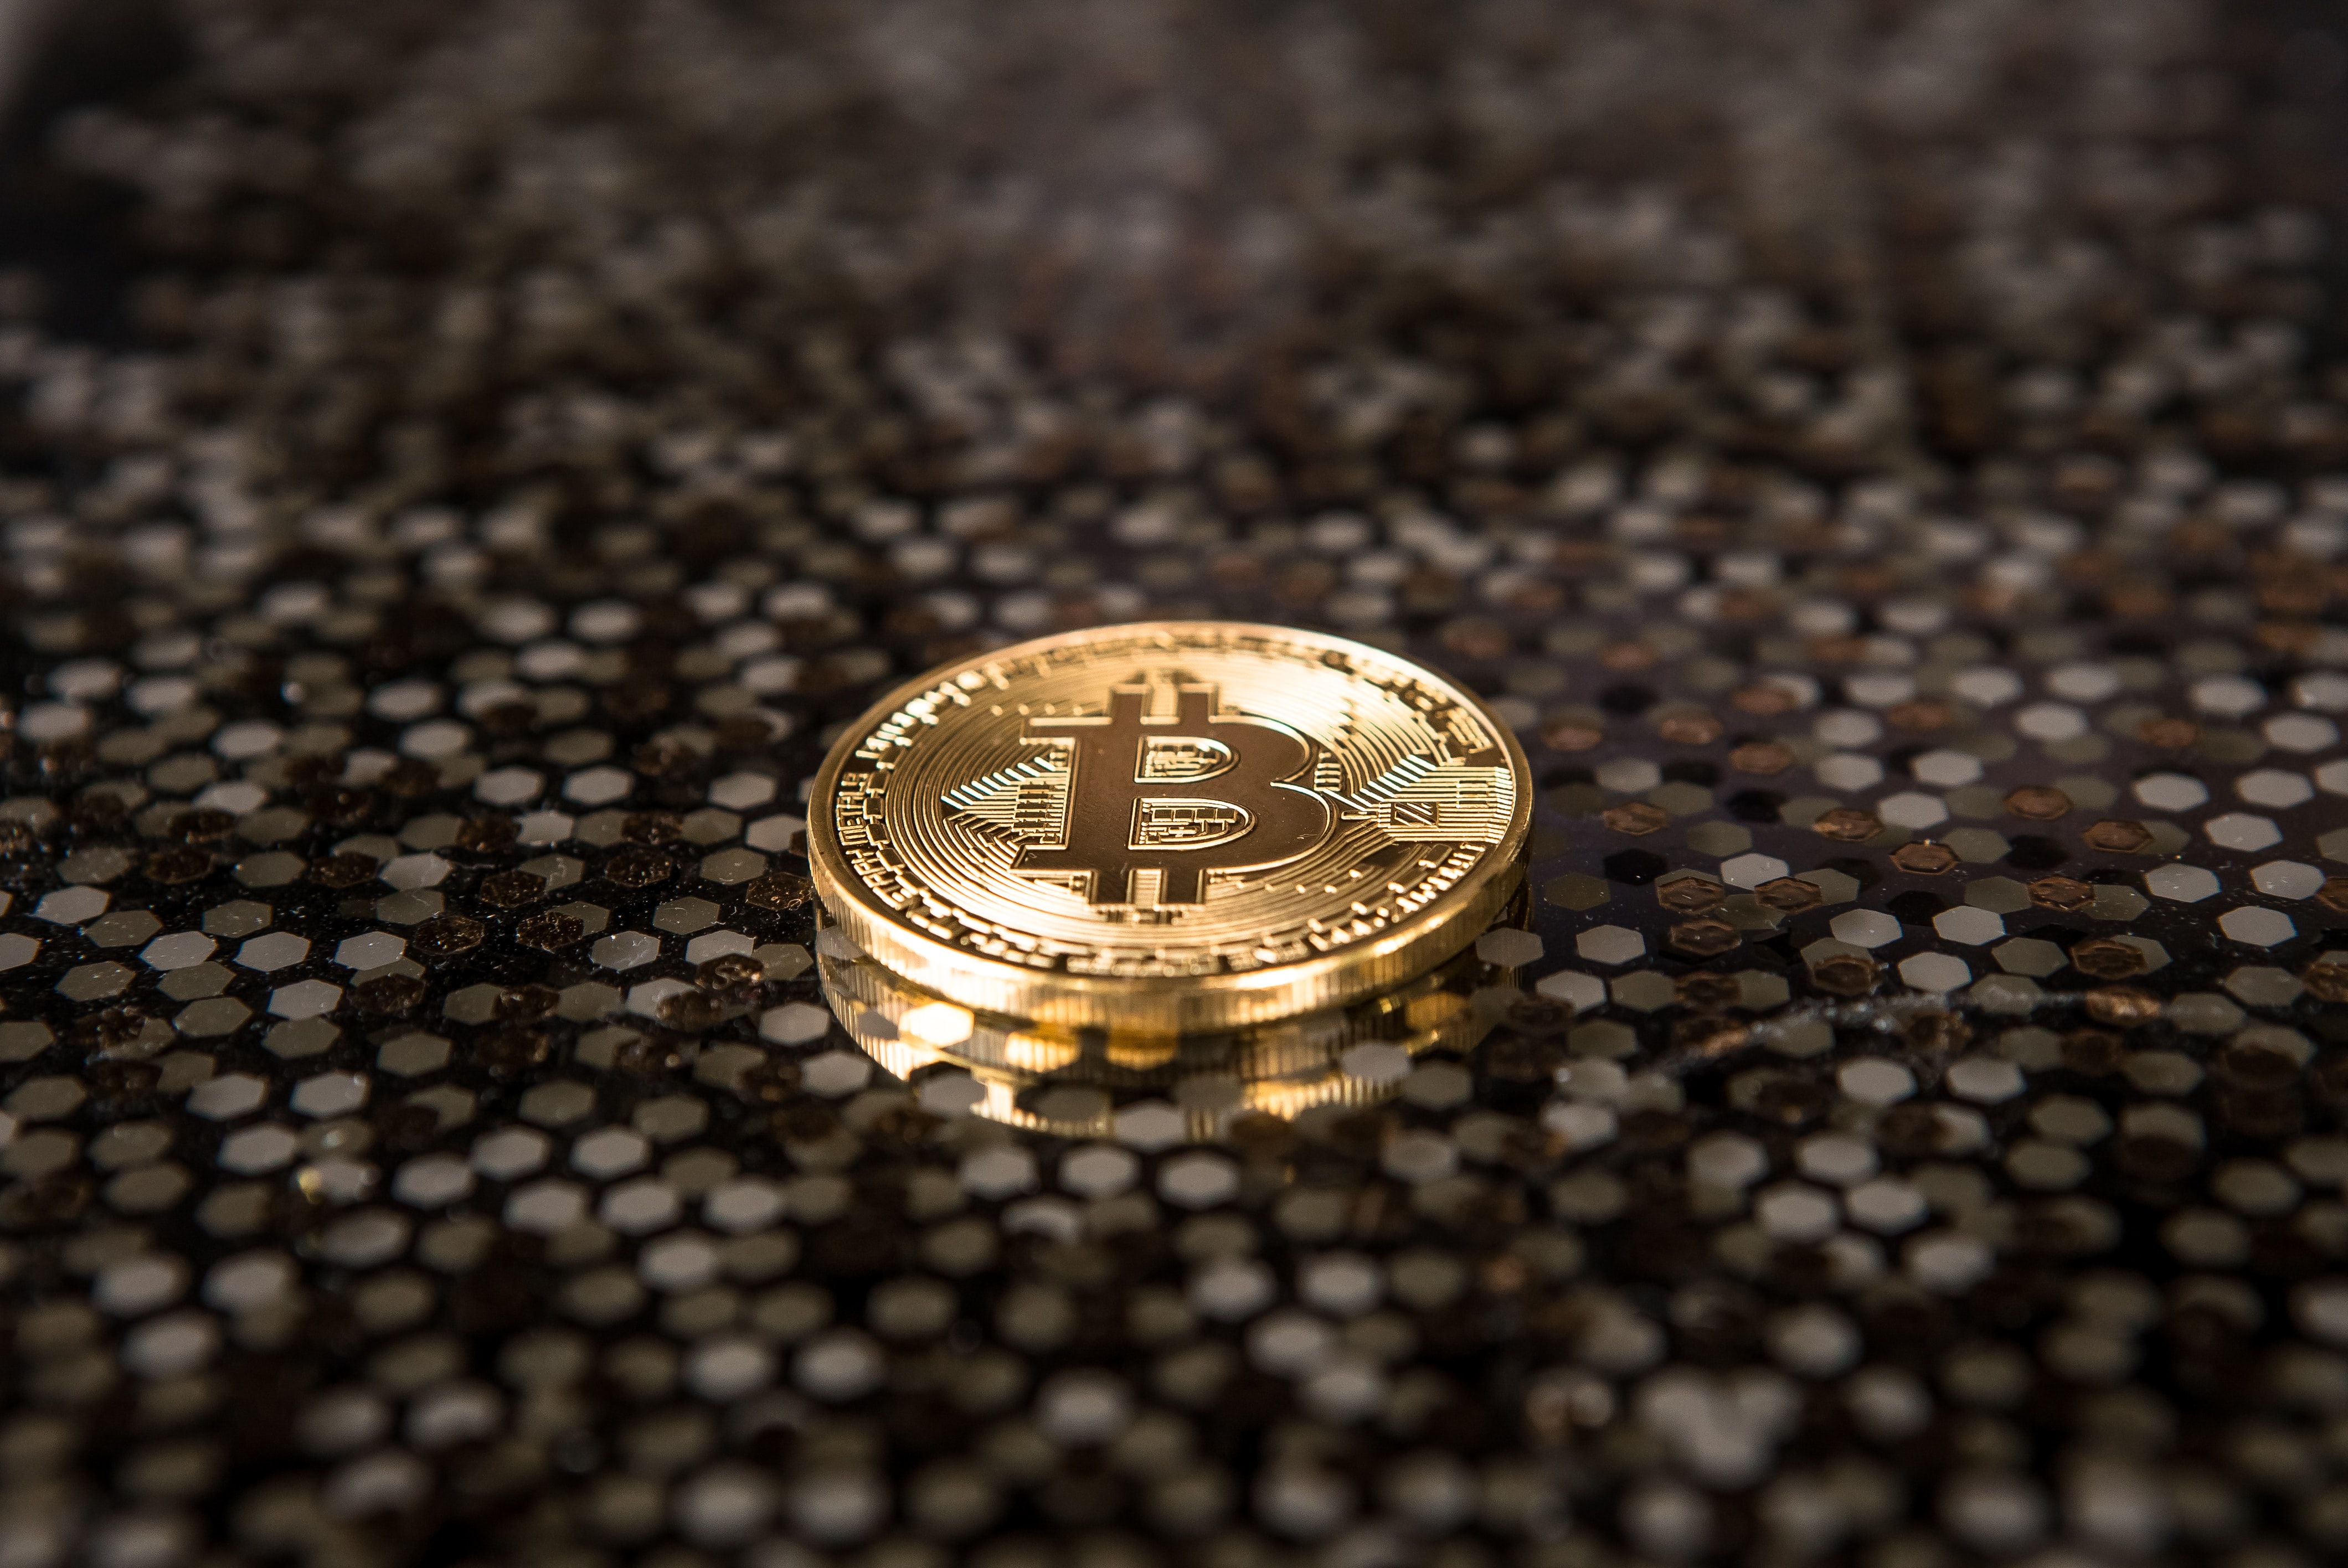 DAILY NOTION: Bitcoin Price hits $18K but Traders Expect ‘Shallow’ Pullback Before New High